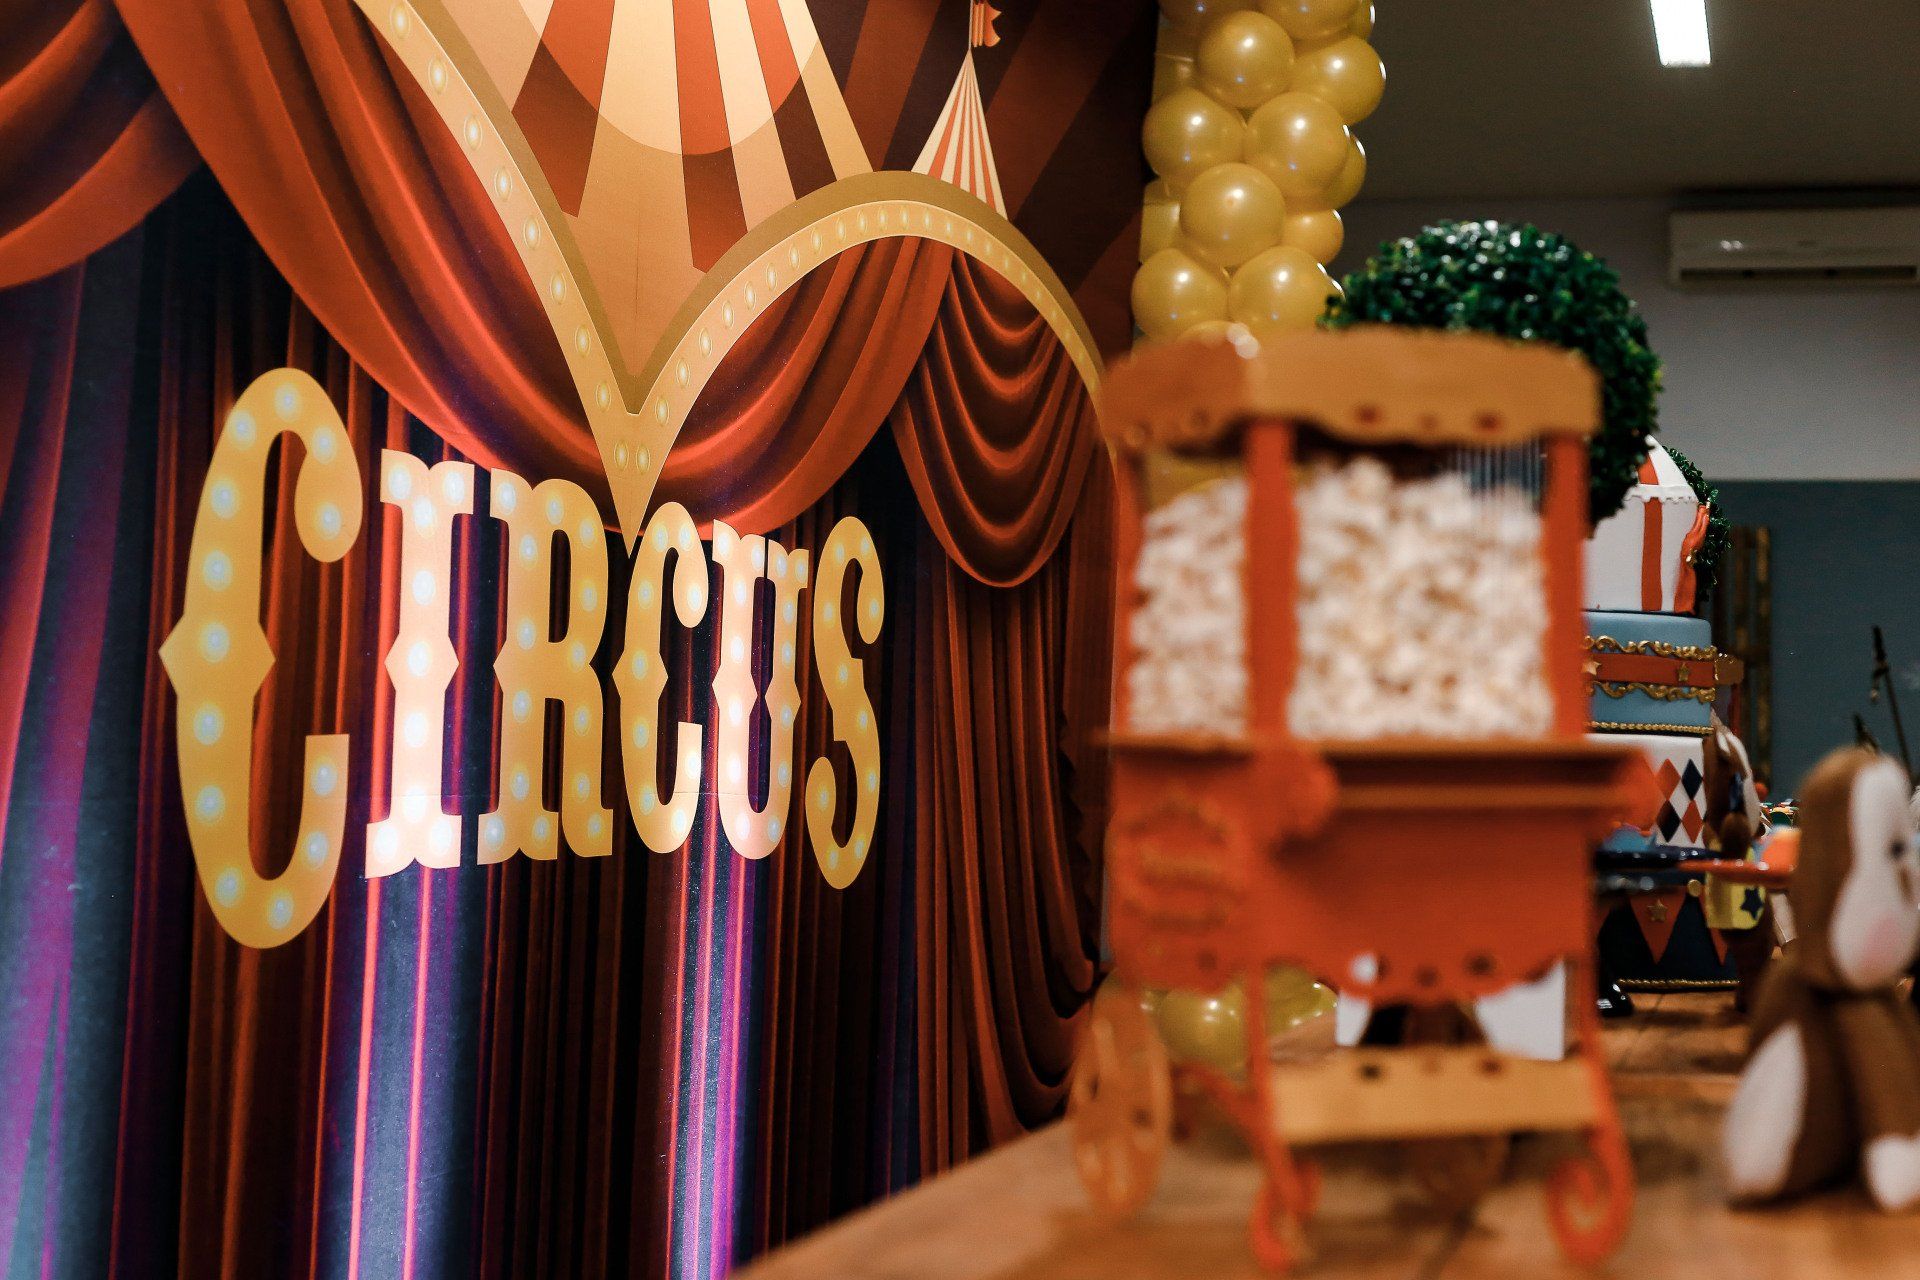 A circus sign with a popcorn cart in front of it